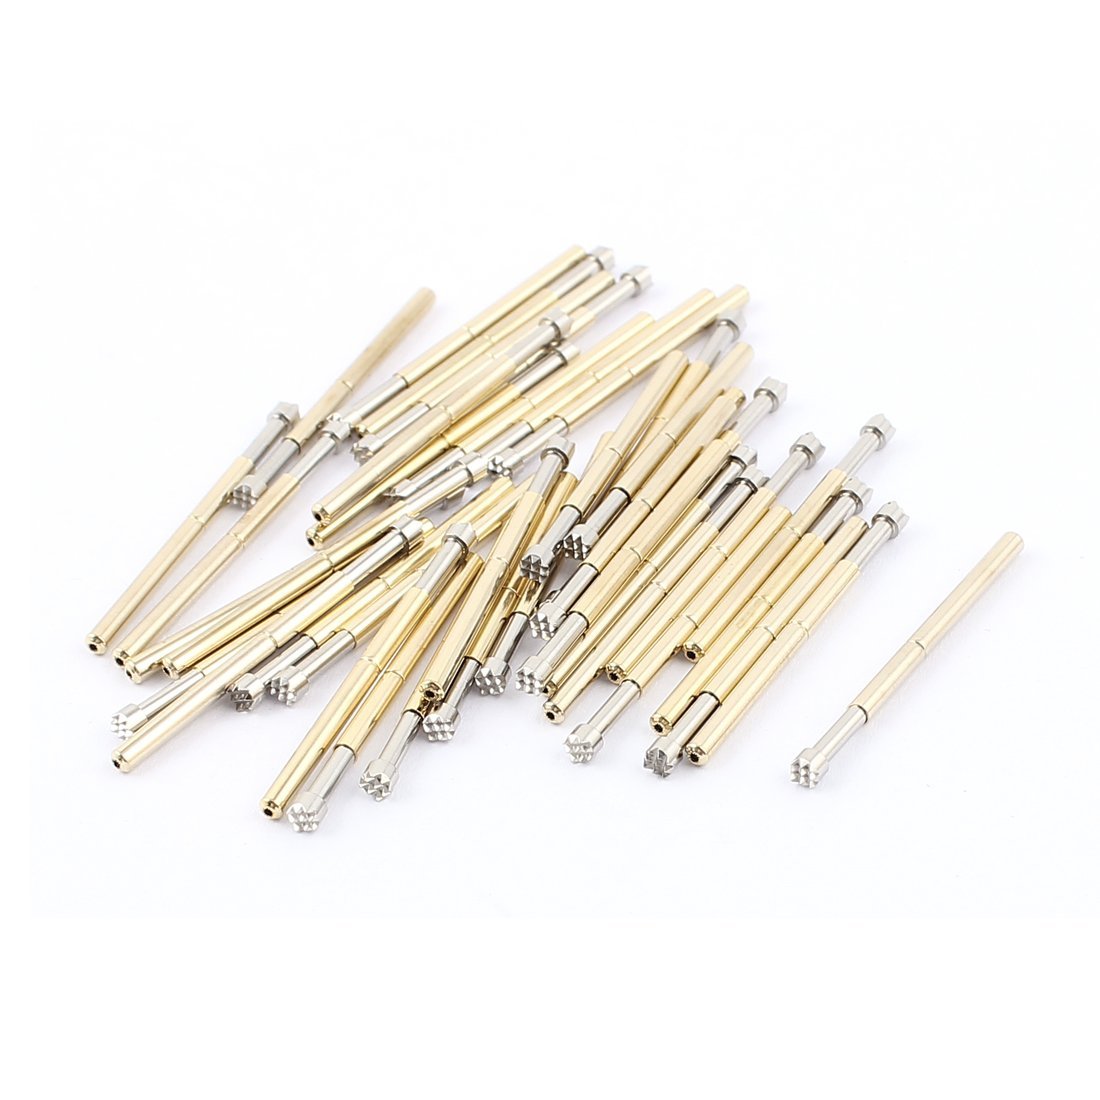 luoyimao 100pcs p125h 25mm crown tip spring test probes pins 33mm for pcb borad